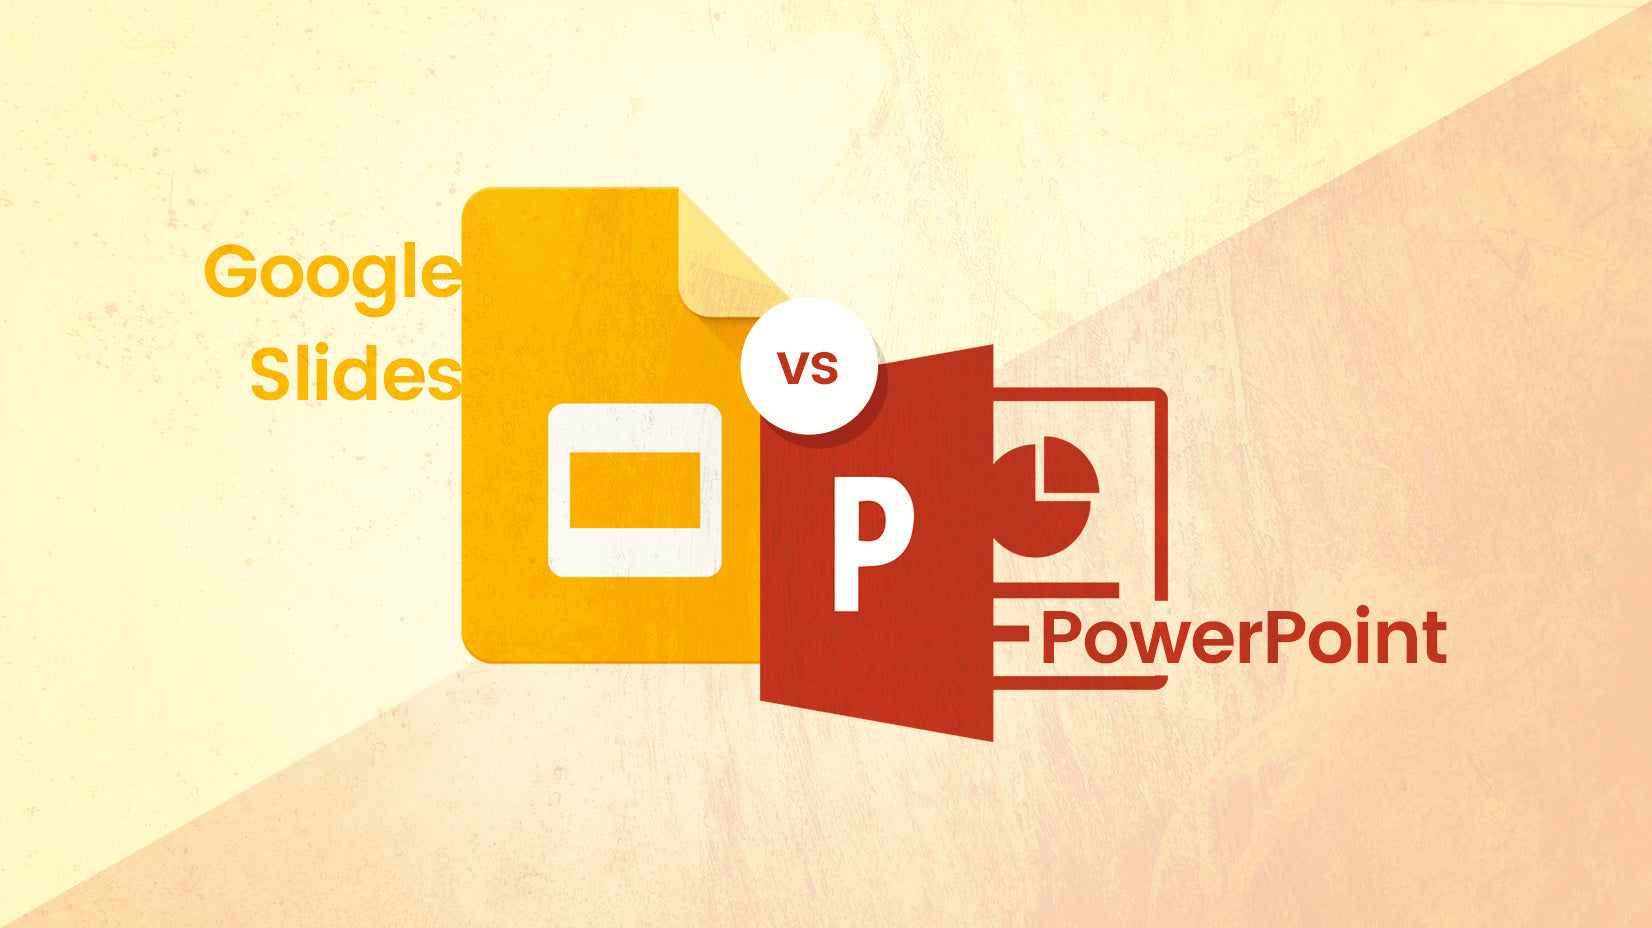 What Is The Google Equivalent Of Powerpoint?